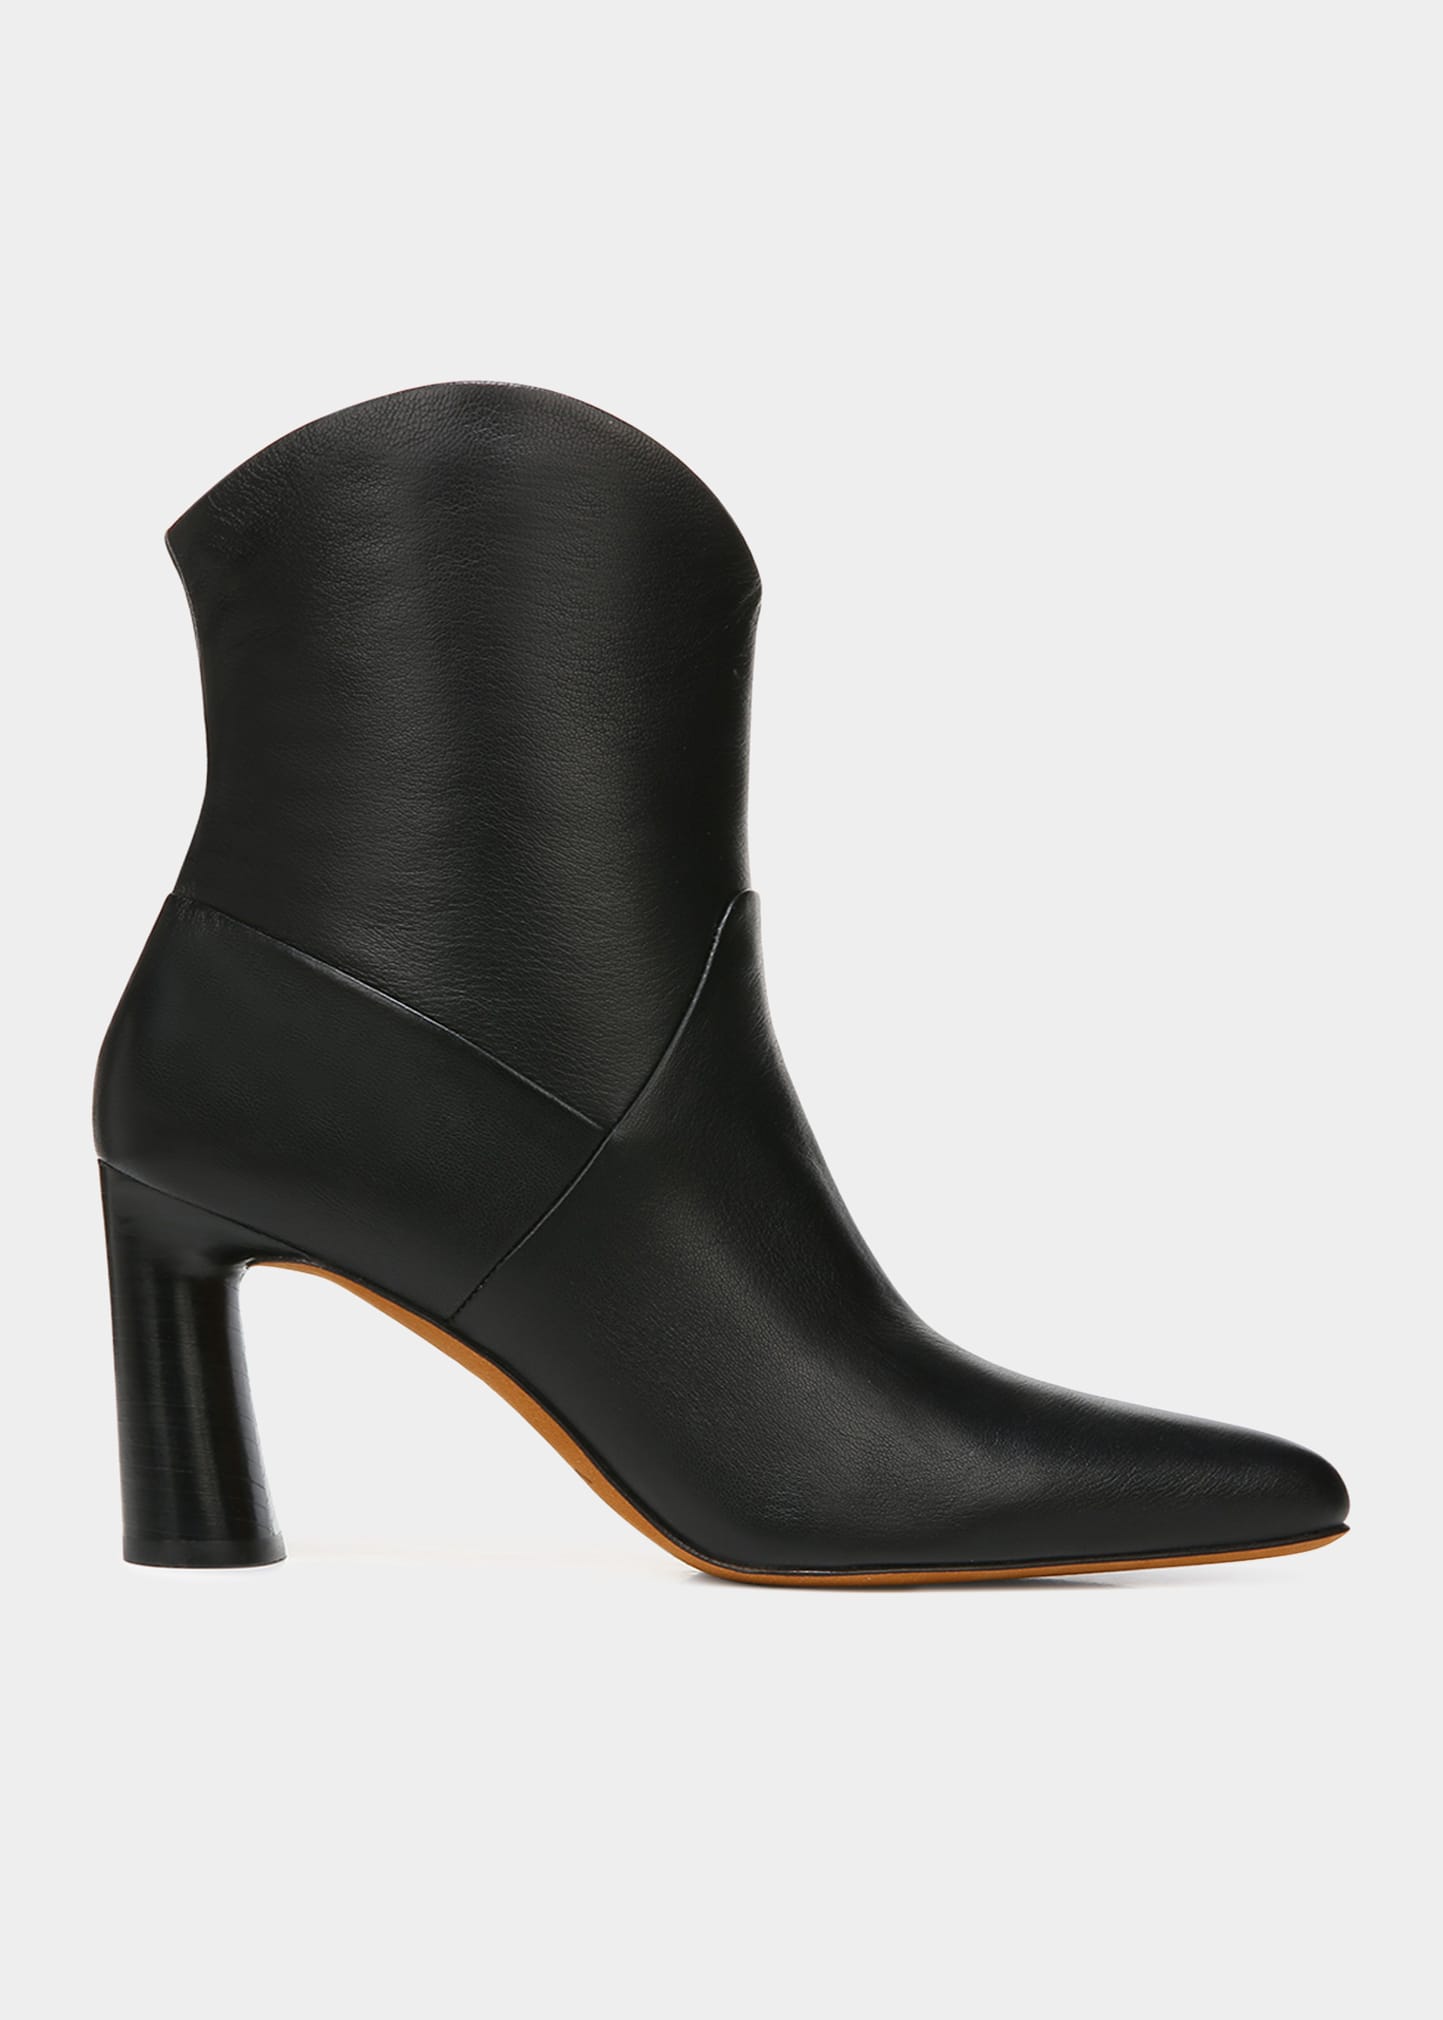 Vince Harlow Leather Ankle Booties